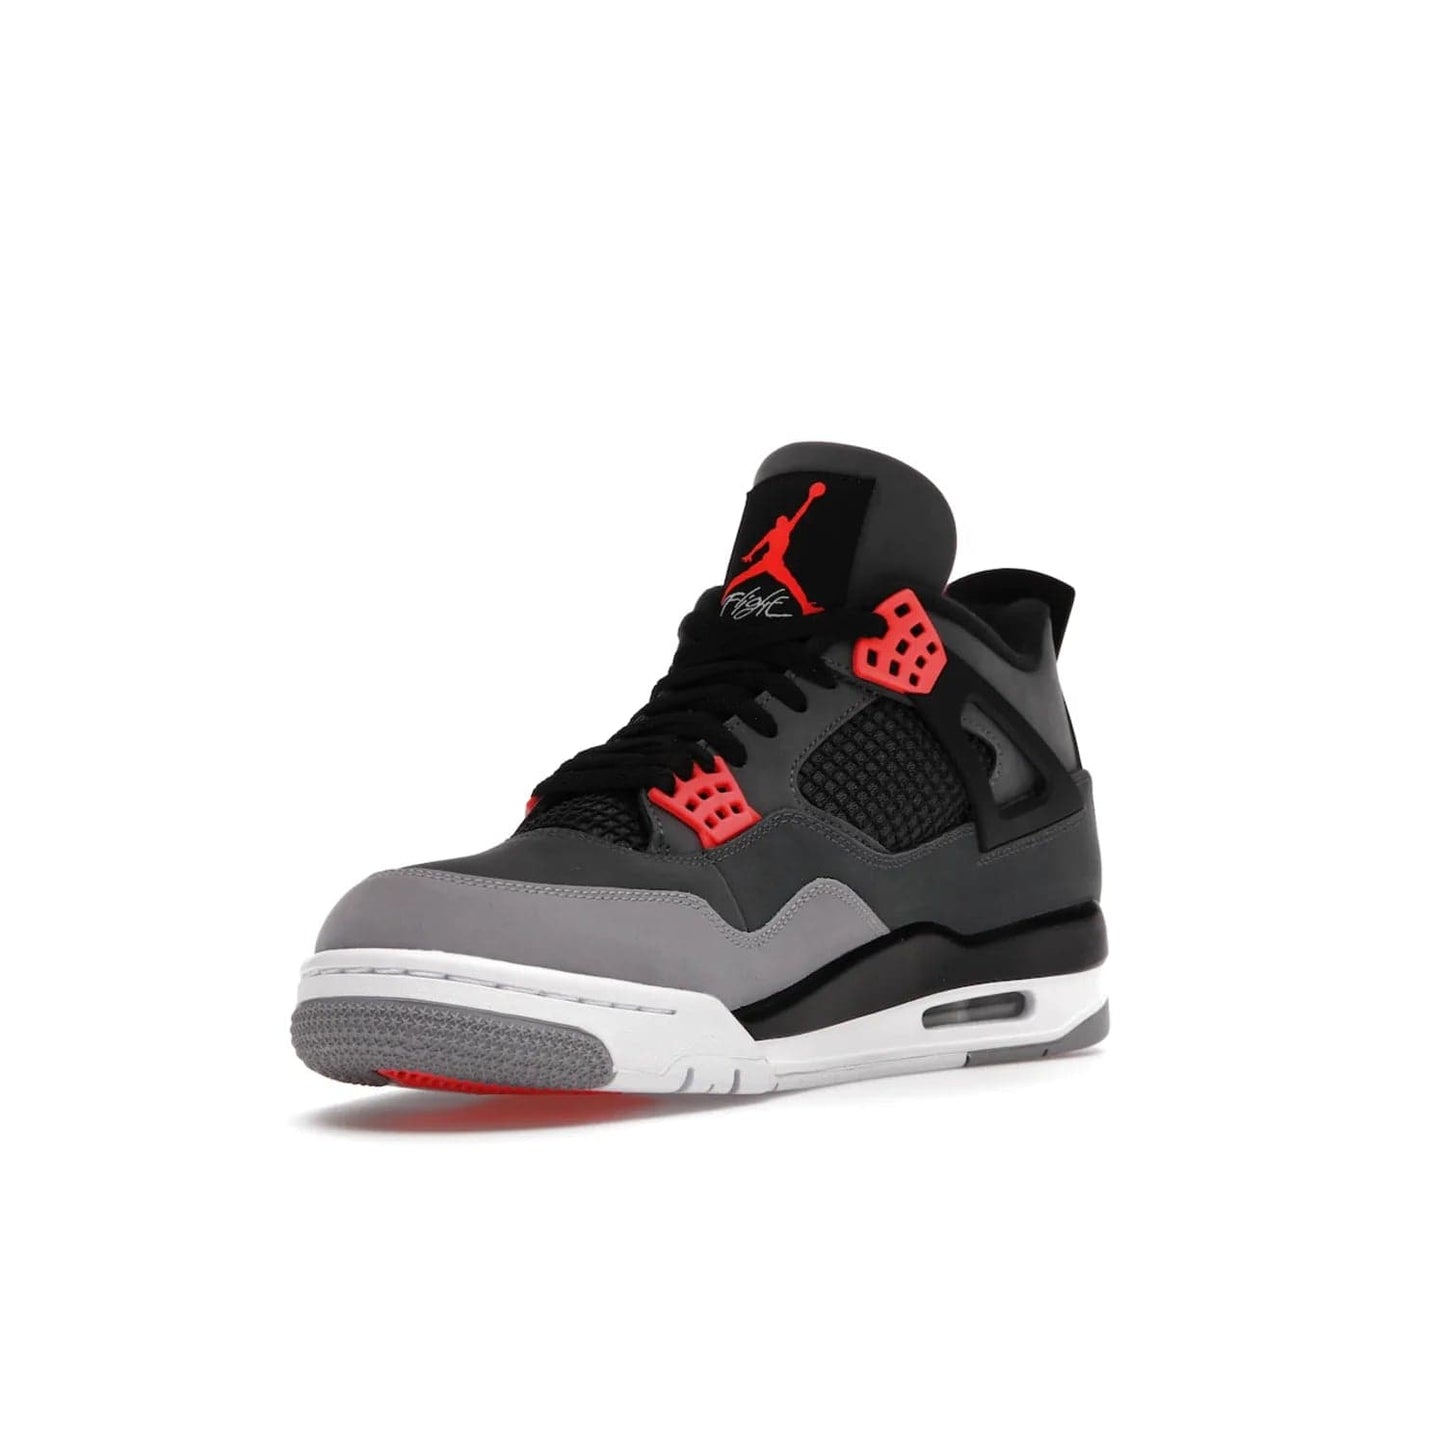 Jordan 4 Retro Infrared - Image 14 - Only at www.BallersClubKickz.com - Introducing the classic & timeless Air Jordan 4 Infrared. Durabuck upper, TPU mesh inserts, tech straps & heel tabs in dark grey and infrared accents. White sole with visible Air units. Out June 15, 2022. Get your pair now!